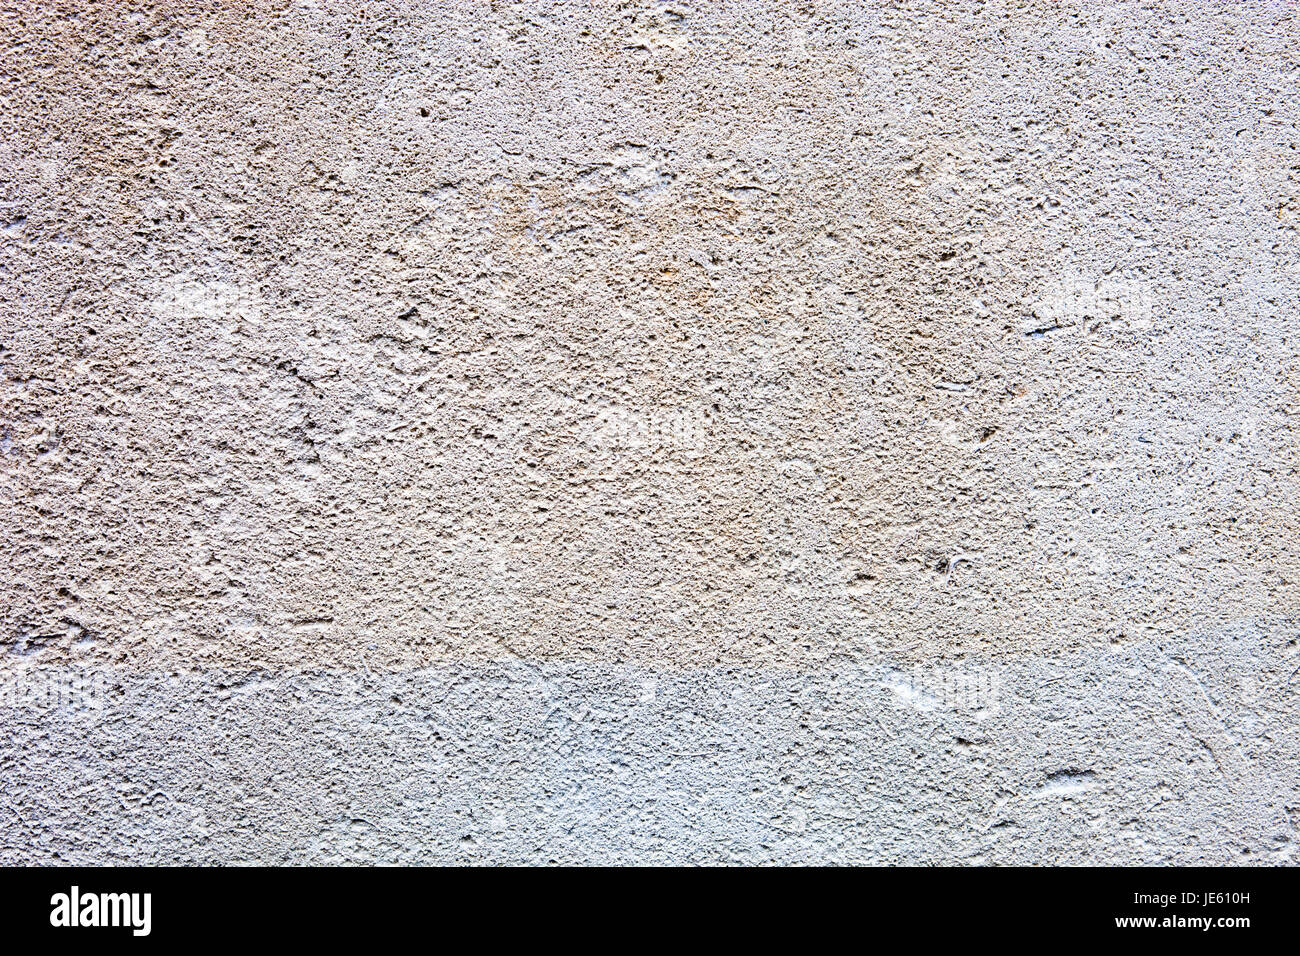 Concrete surface with rich and various texture. Stock Photo